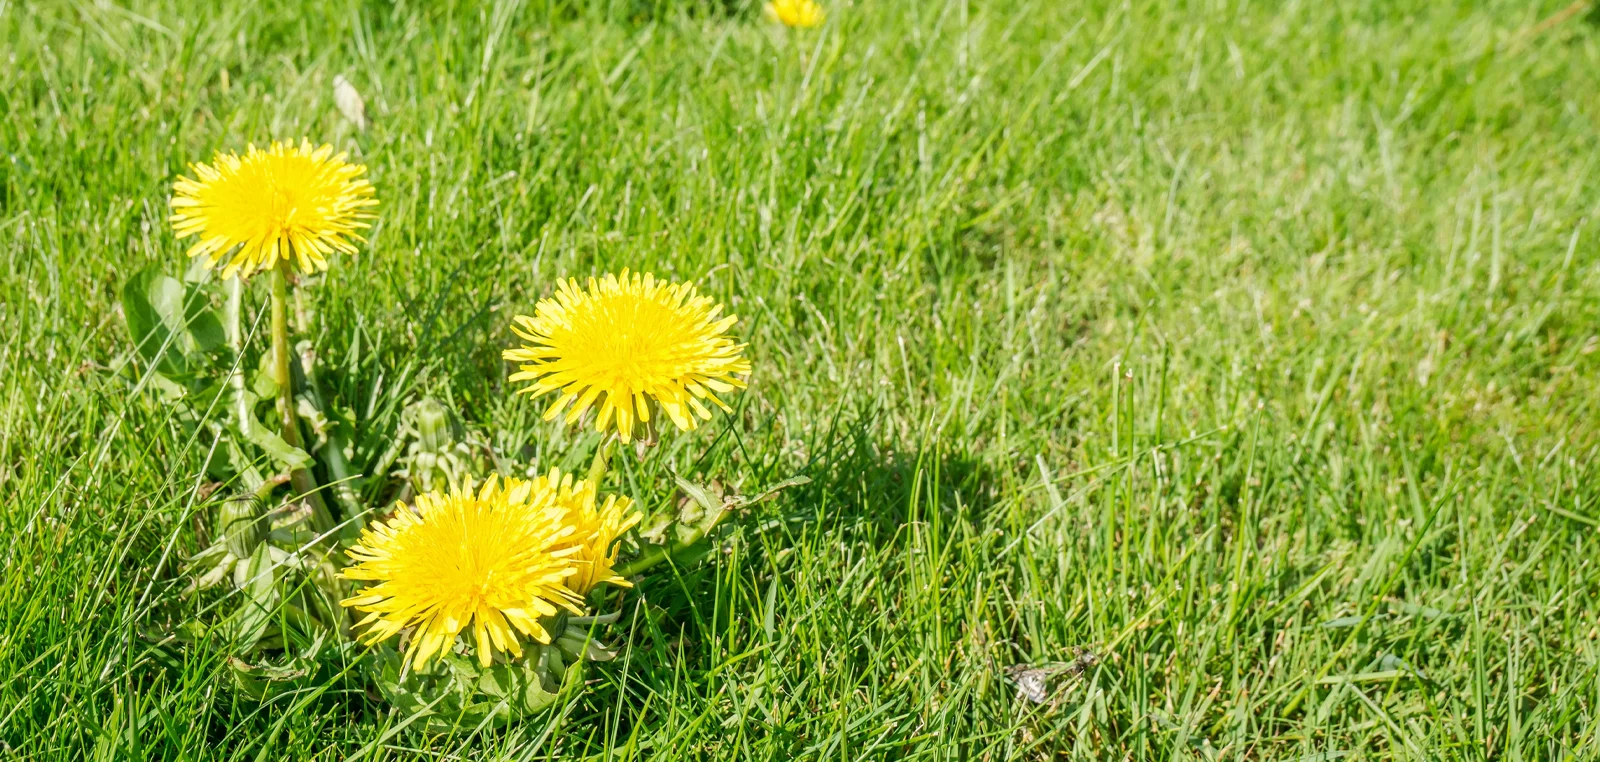 A cluster of dandelions